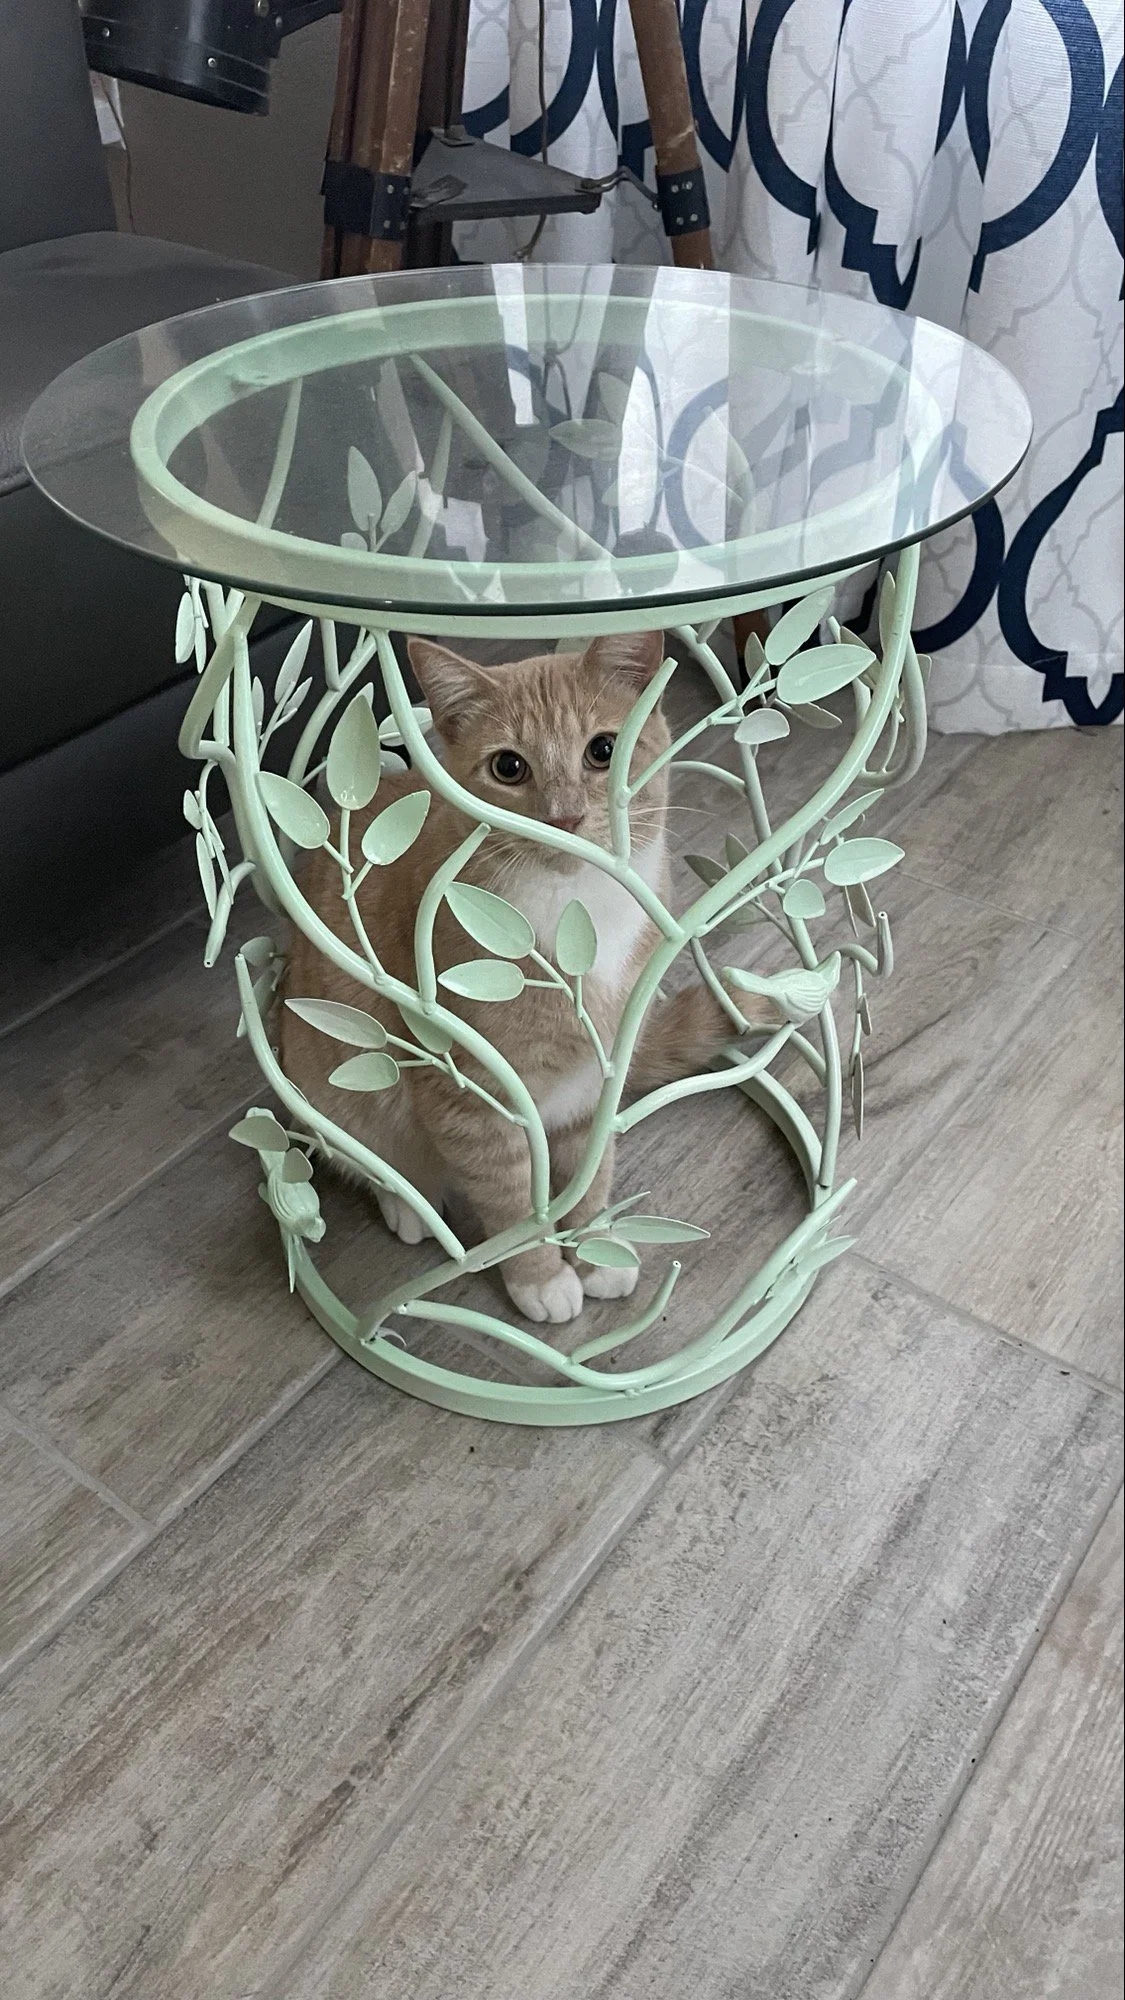 a light brown and white cat stuck underneath a side table with twig and leaf inspired legs and a clear glass top